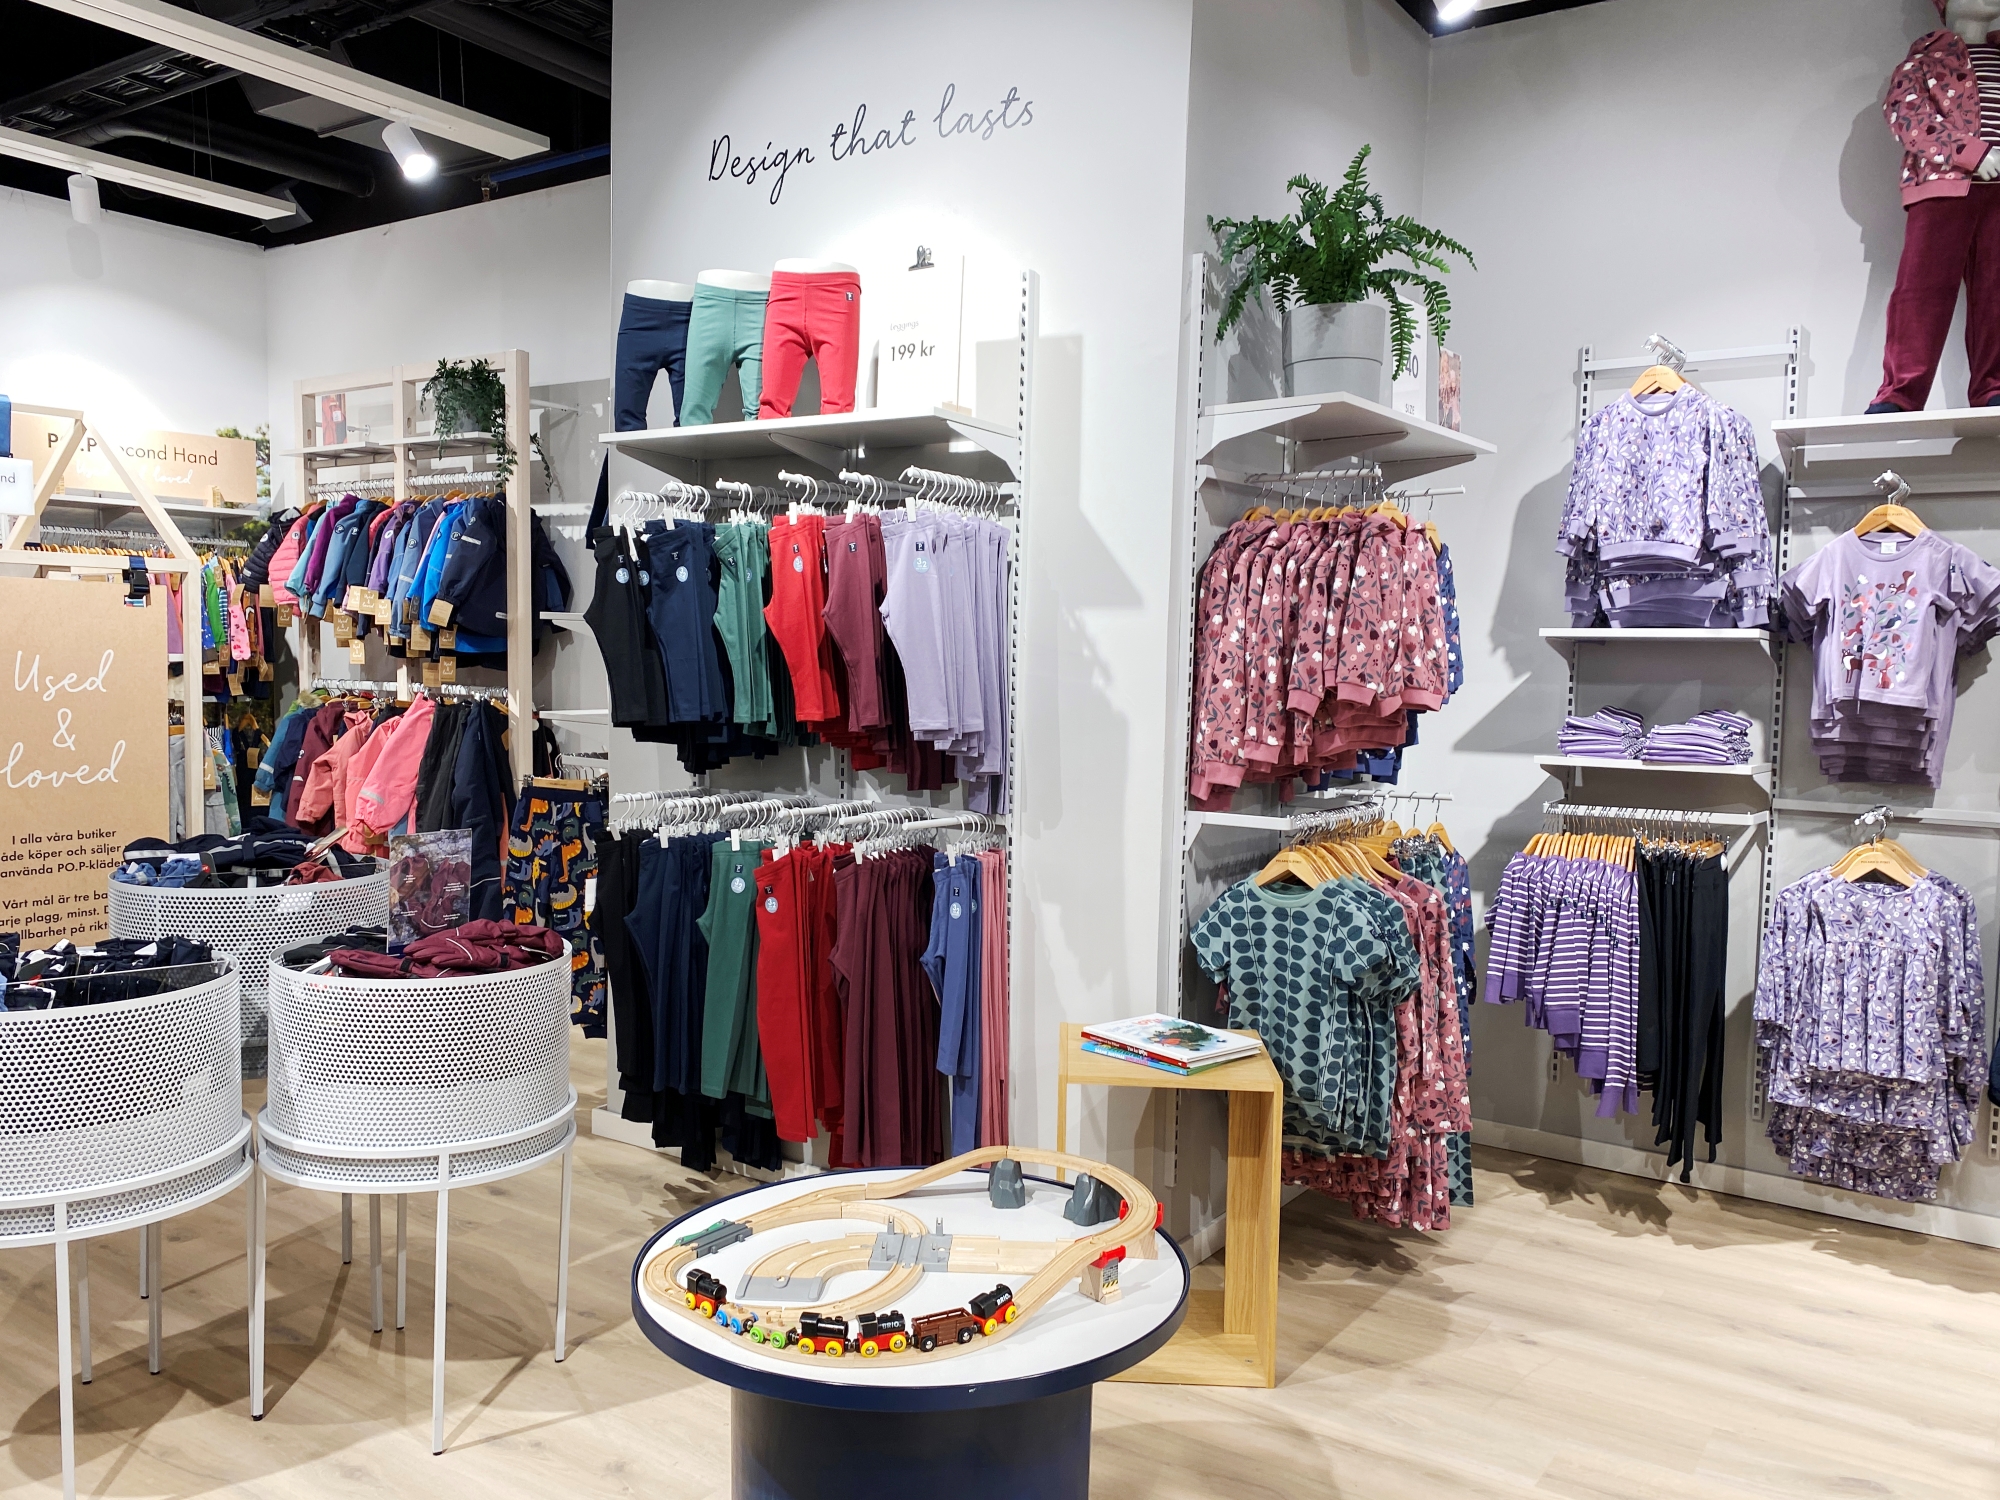 Colourful and patterned clothes for children hanging on a store. There is also a table with a wooden track and cars on it in the middle of the store and a quote on the wall that says, “design that lasts”.